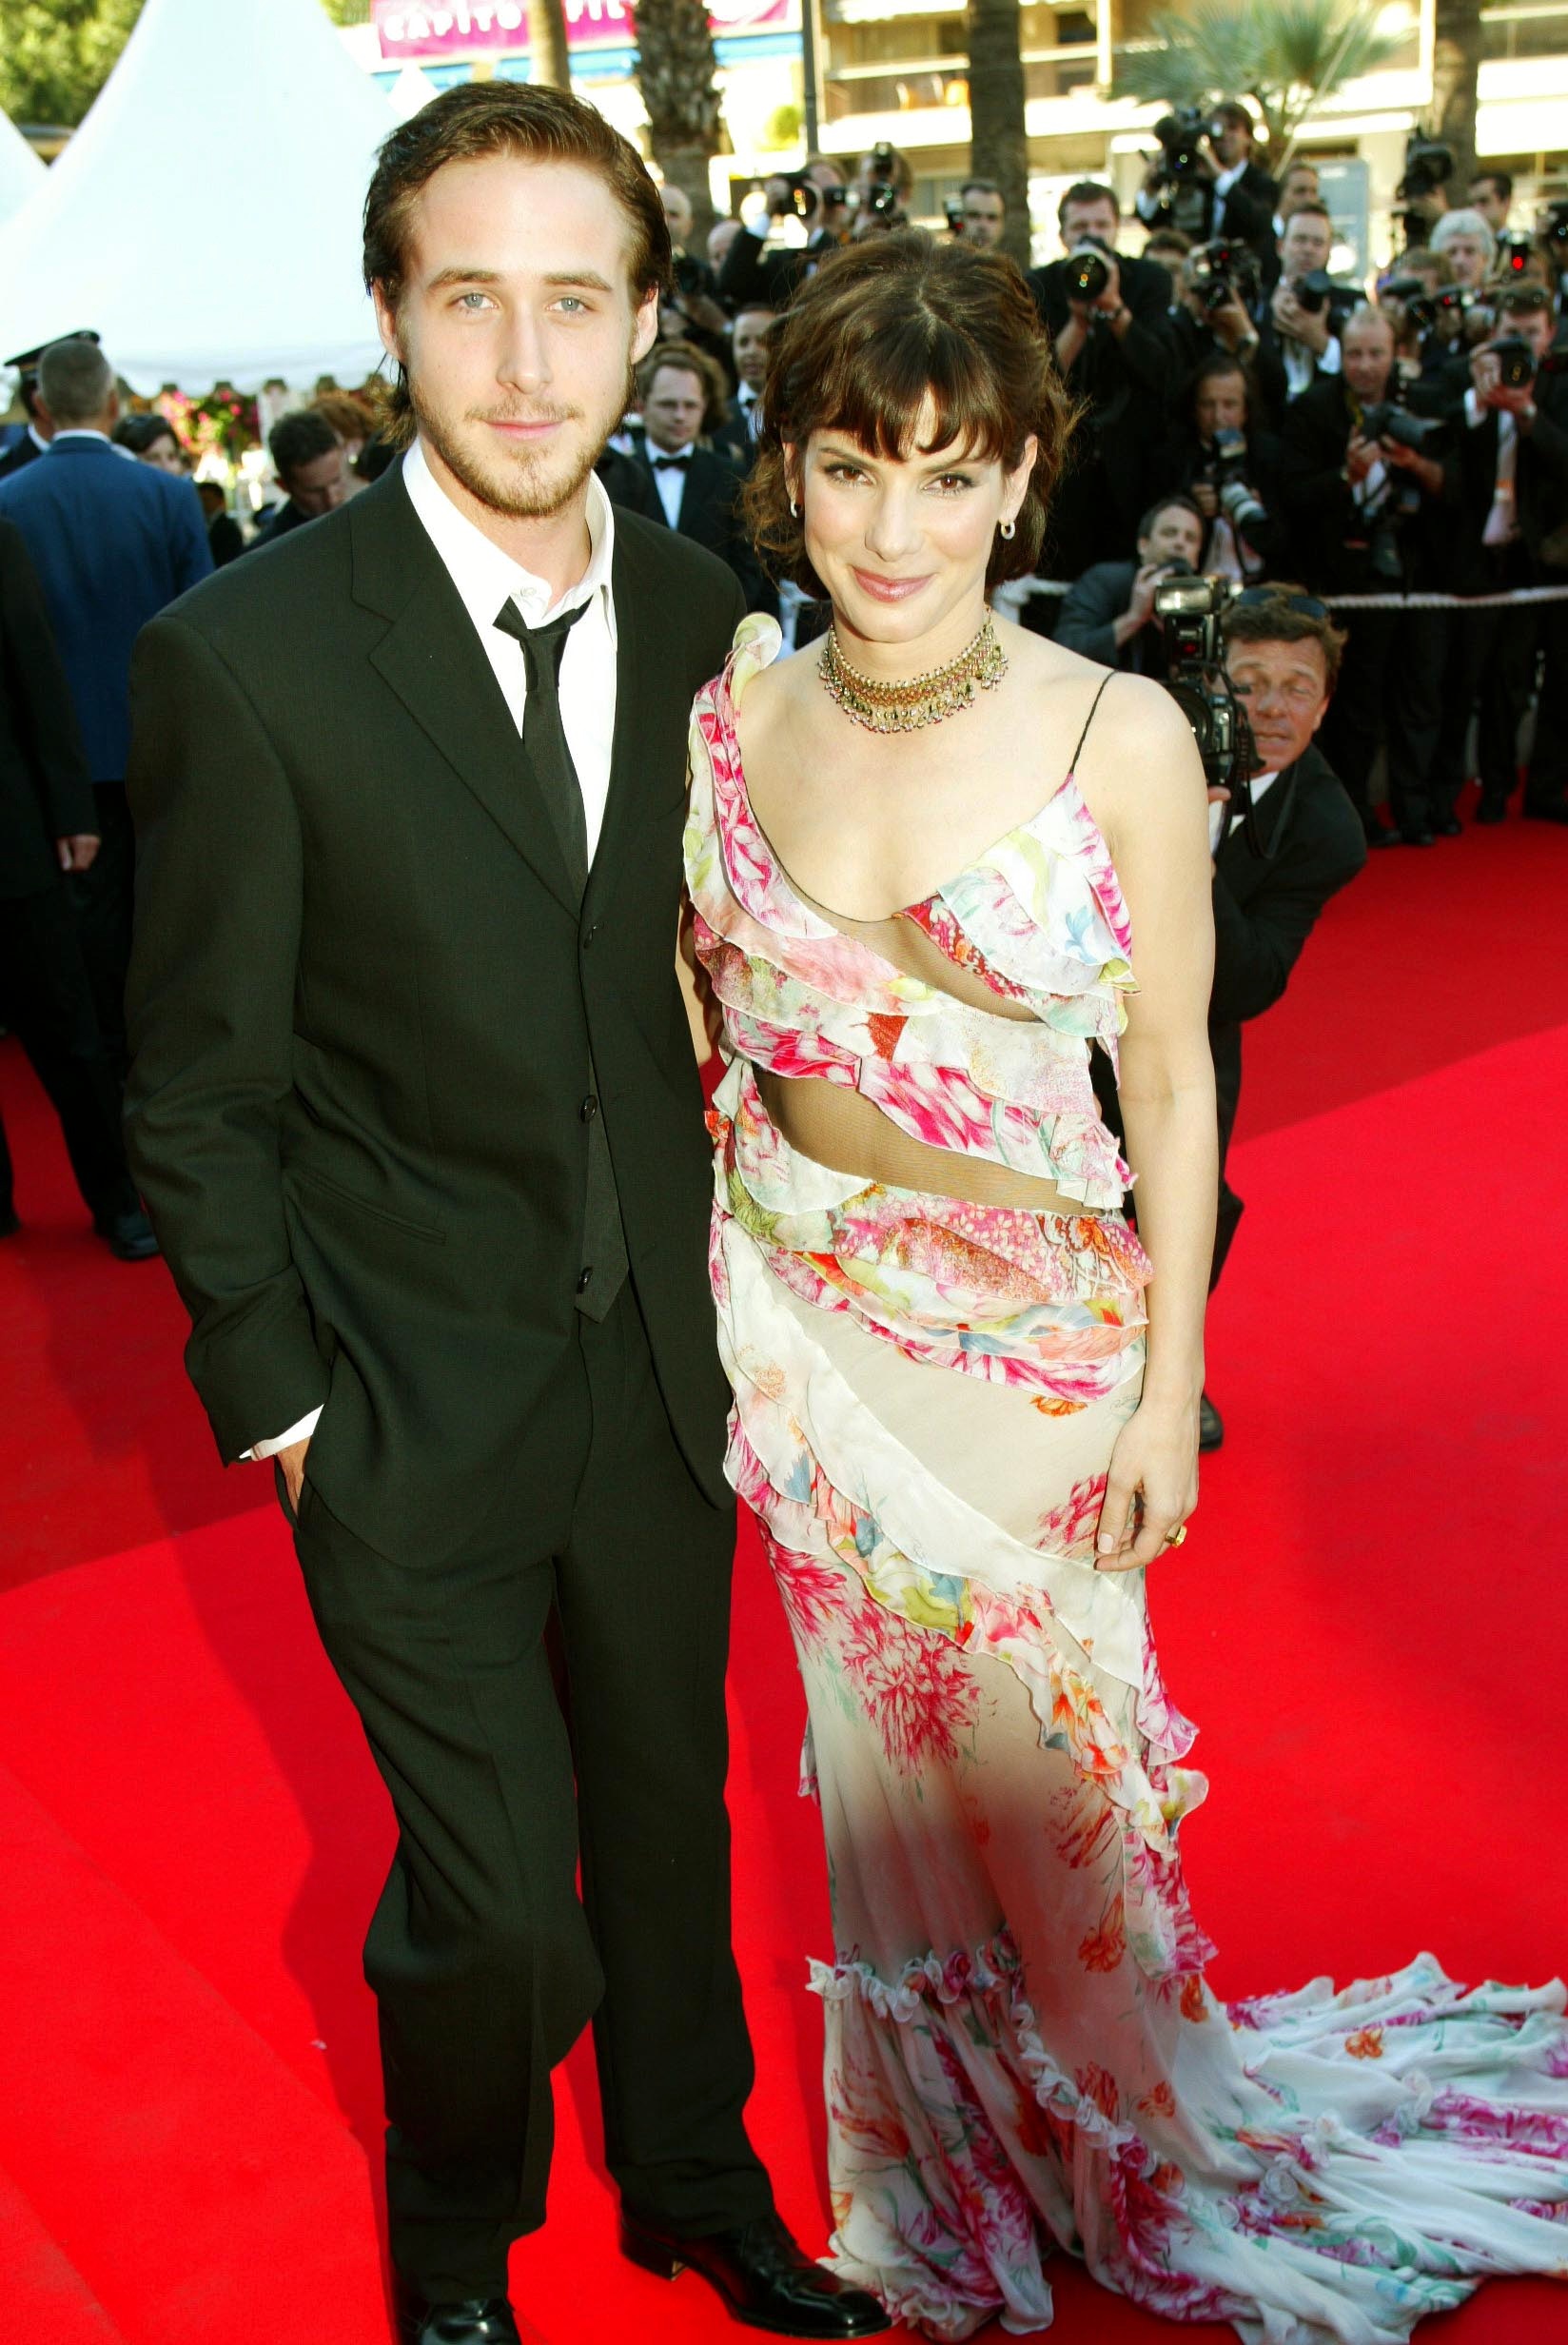 Ryan Gosling and Sandra Bullock at the 55th Cannes Film Festival in Cannes, France, on May 24, 2002 | Source: Getty Images